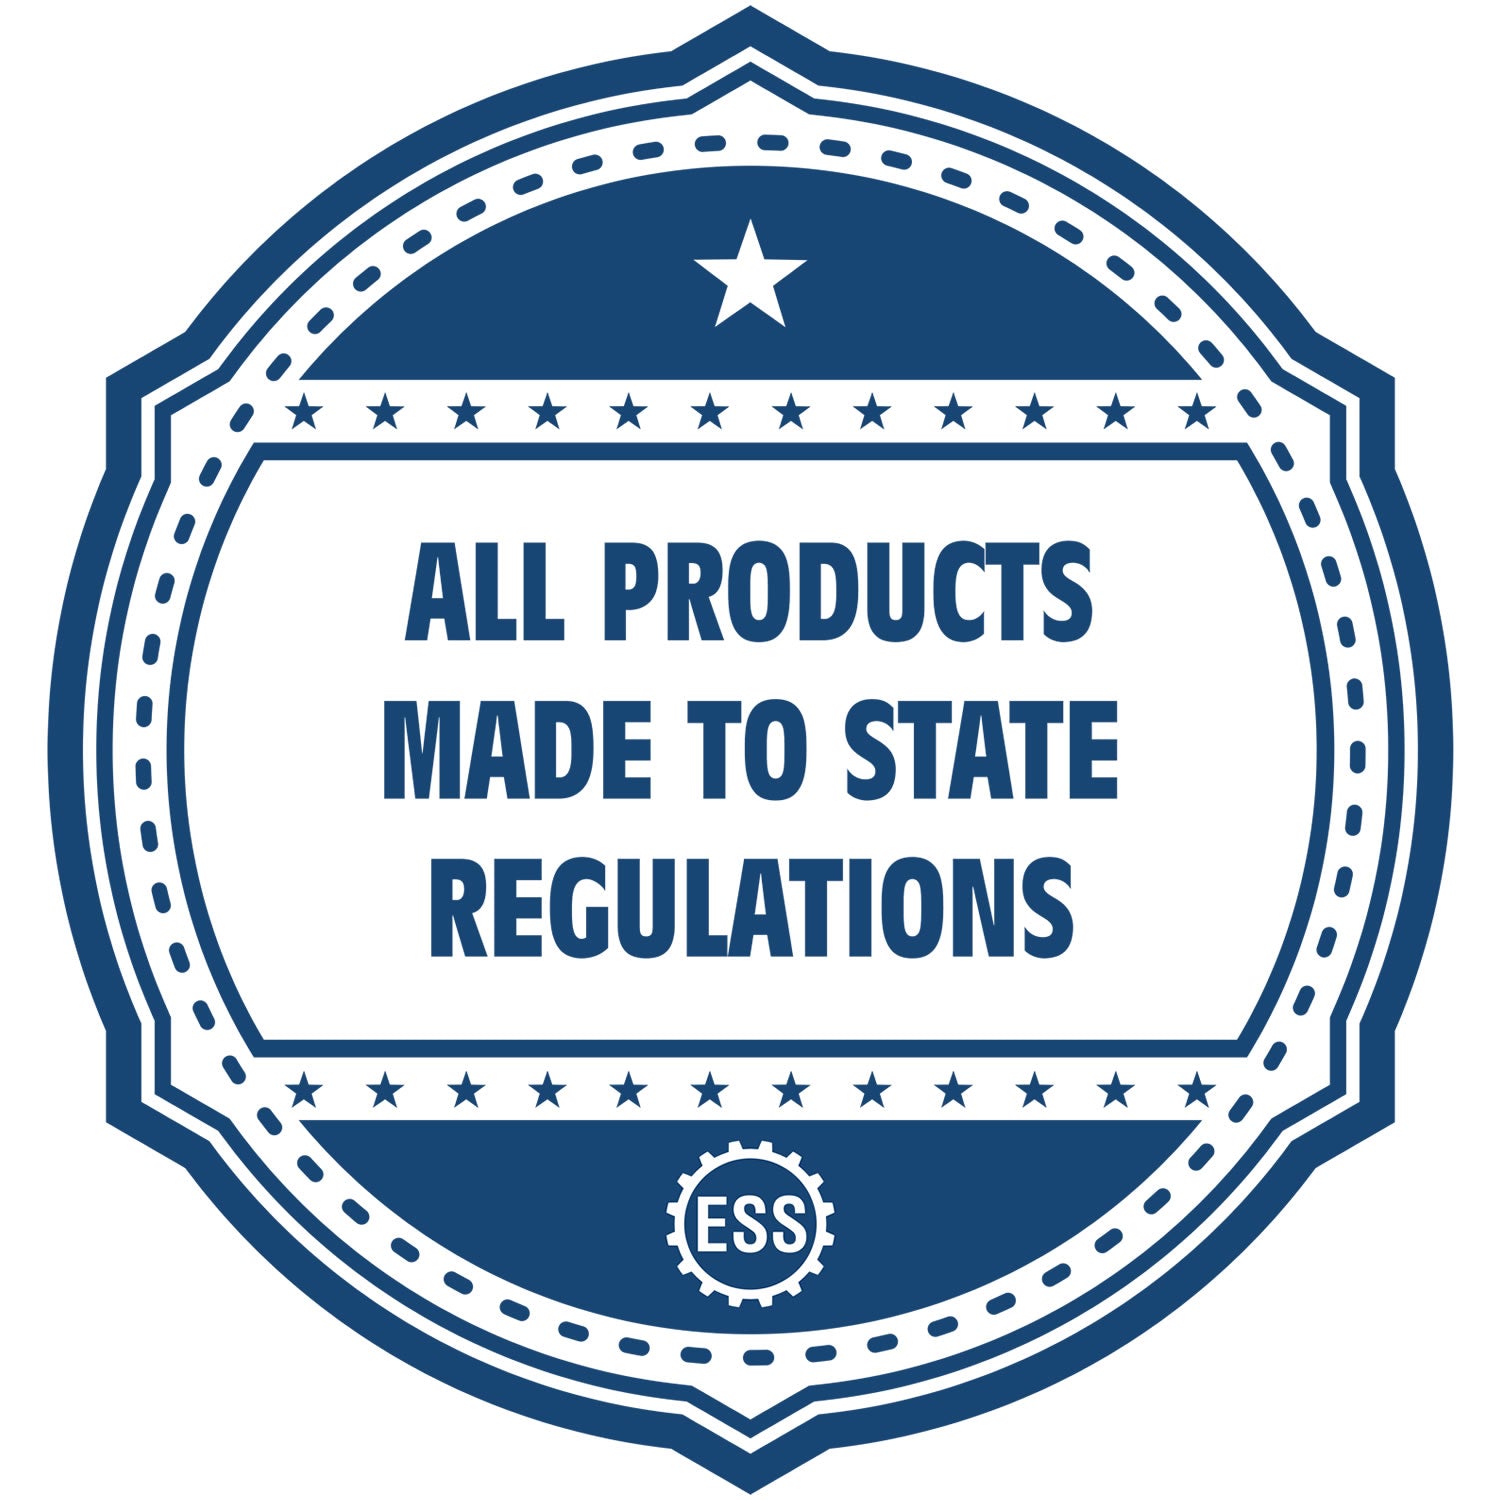 An icon or badge element for the Premium MaxLight Pre-Inked South Dakota Engineering Stamp showing that this product is made in compliance with state regulations.